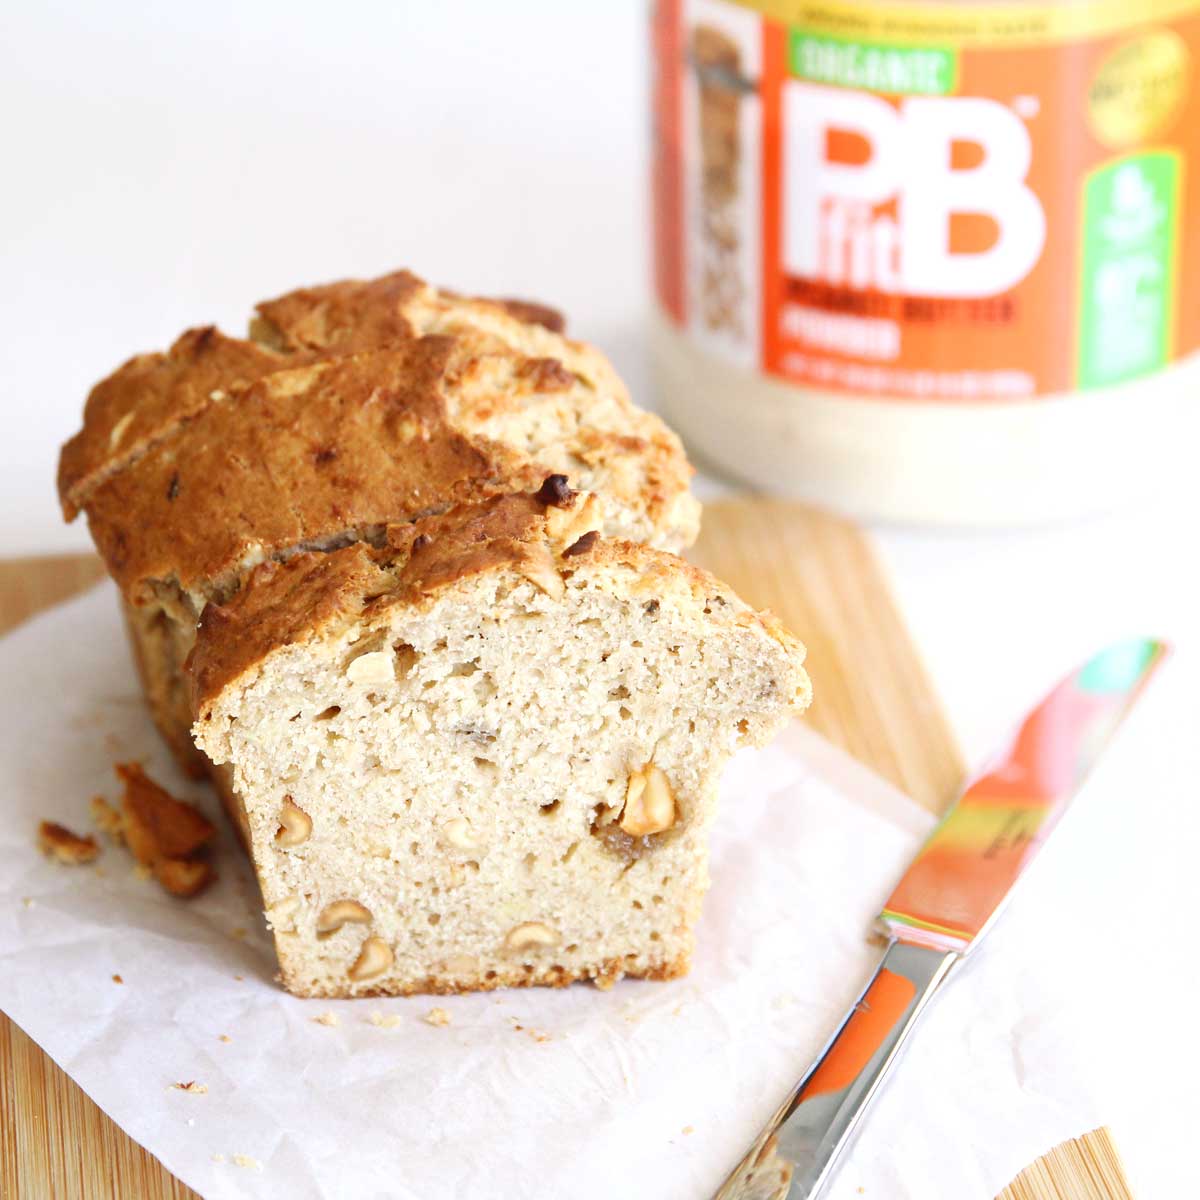 High Protein PB Fit Peanut Butter Banana Bread (Dairy Free, Egg Free Recipe) - Pumpkin Bread With Banana